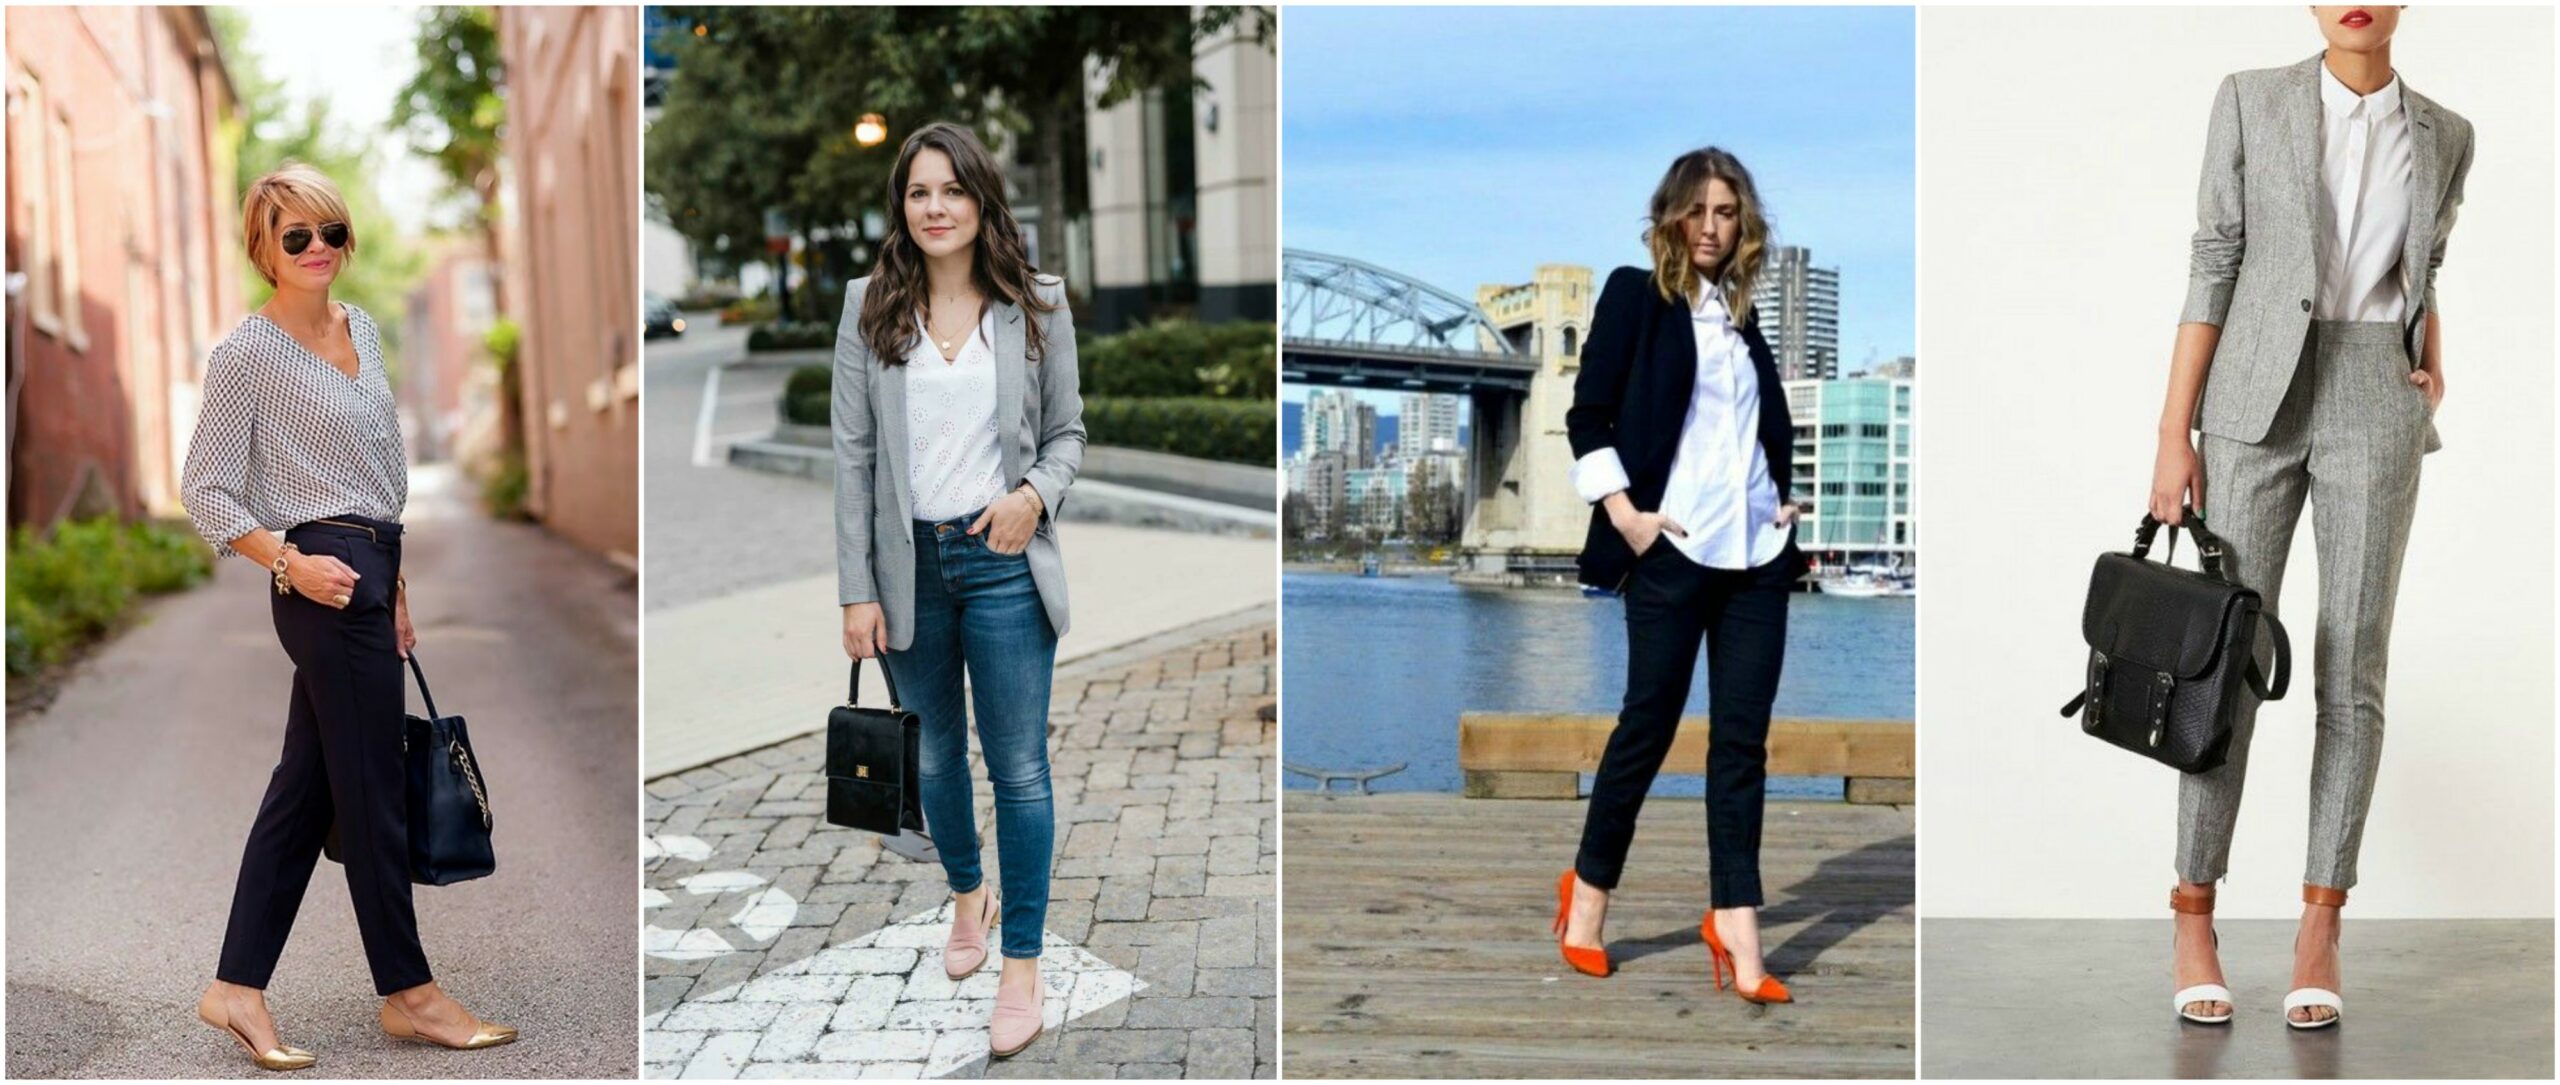 How To Style The Perfect Interview Outfit To Make An Impression - ALL ...